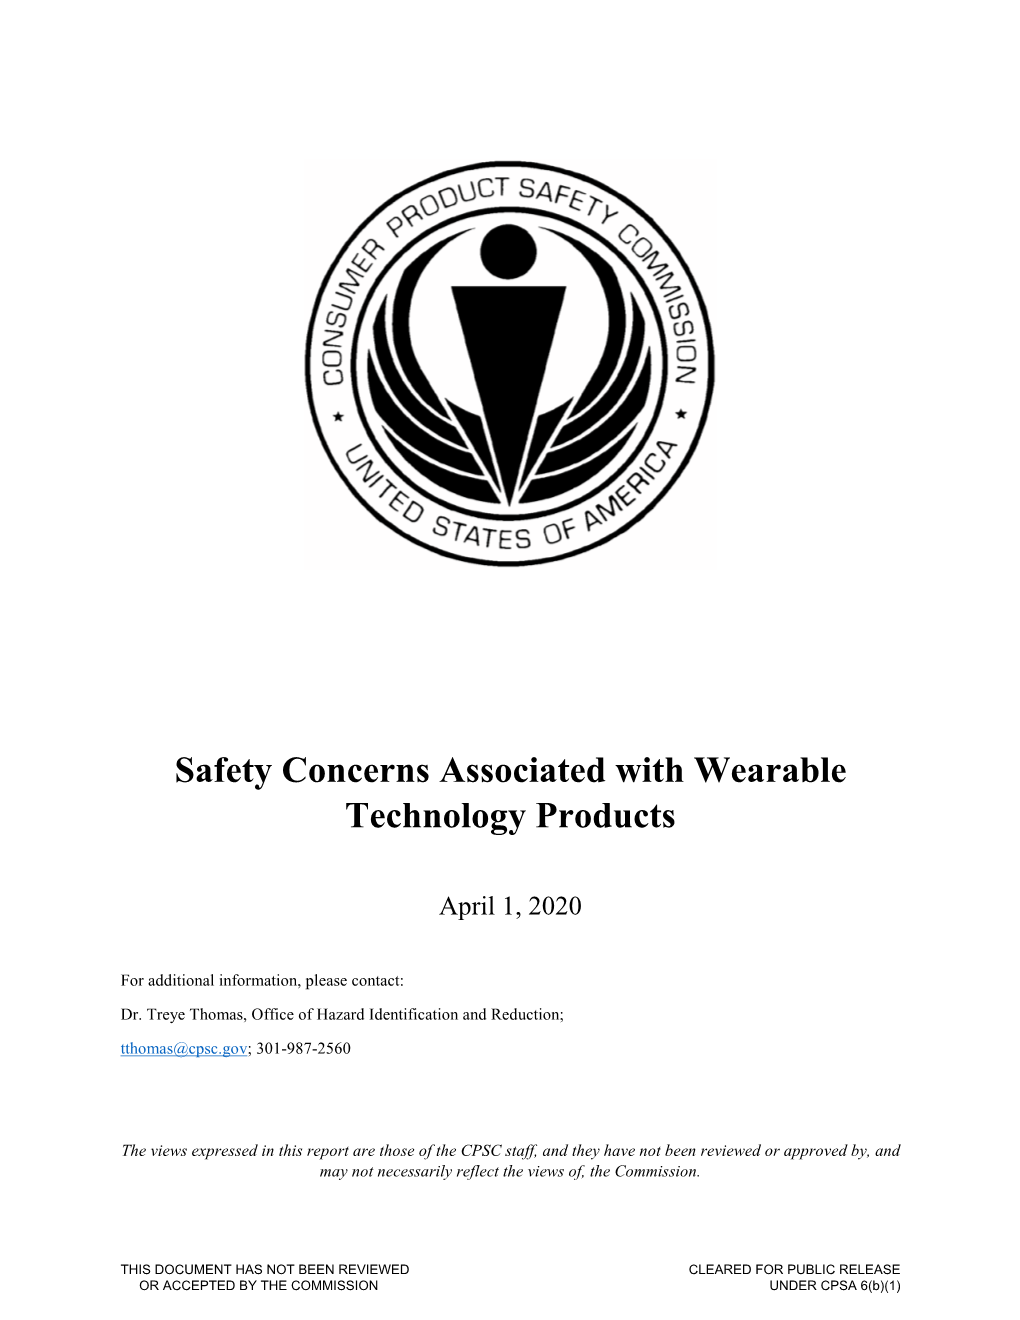 Safety Concerns Associated with Wearable Technology Products